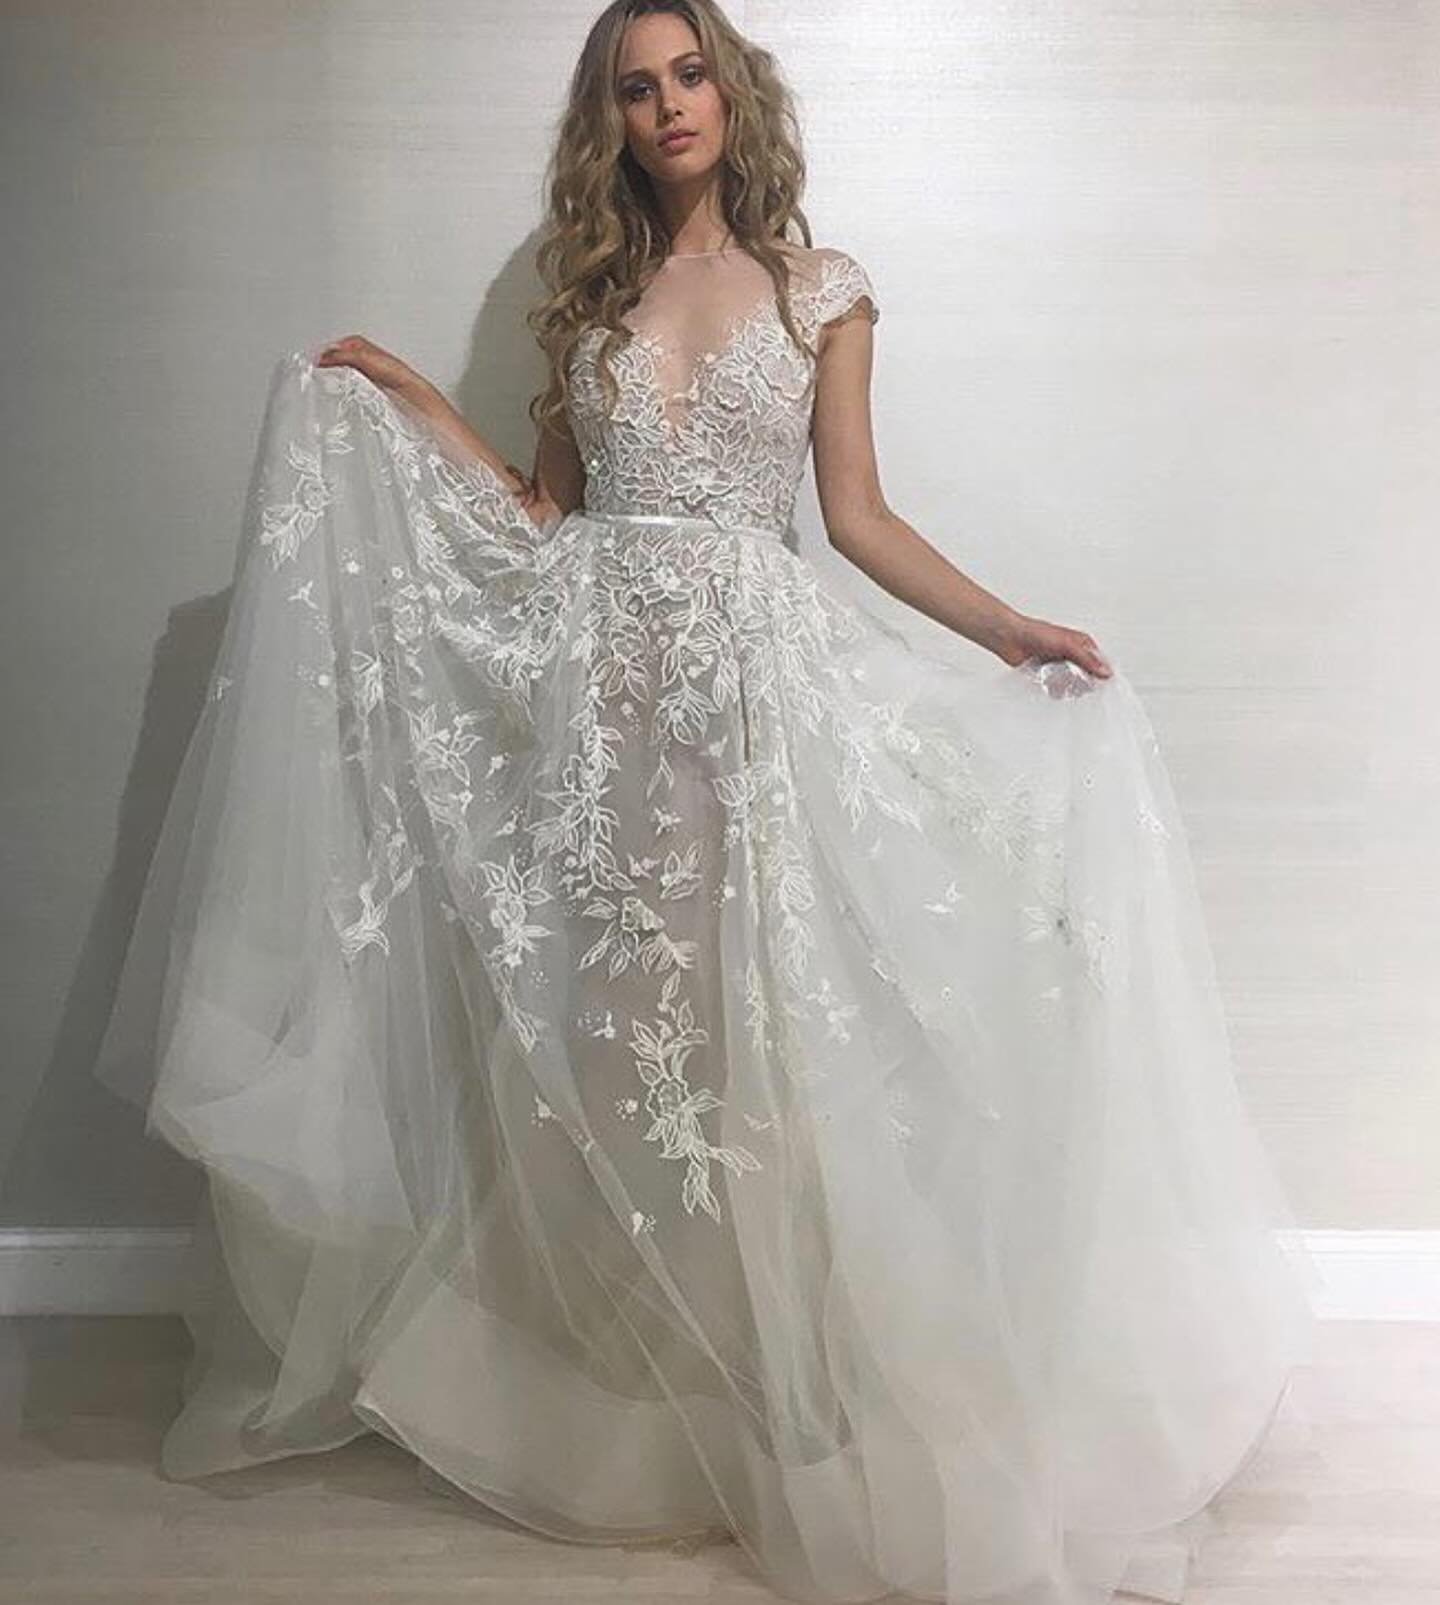 Find the #vaughgown by Hayley Paige in our $990 sale! Only one in stock, it&rsquo;s a size 10 bridal and we can&rsquo;t wait to meet the lucky bride who says yes to this beautiful Hayley Paige sample dress. 
.
.
. #hayleypaige #bridalsamplesale #brid